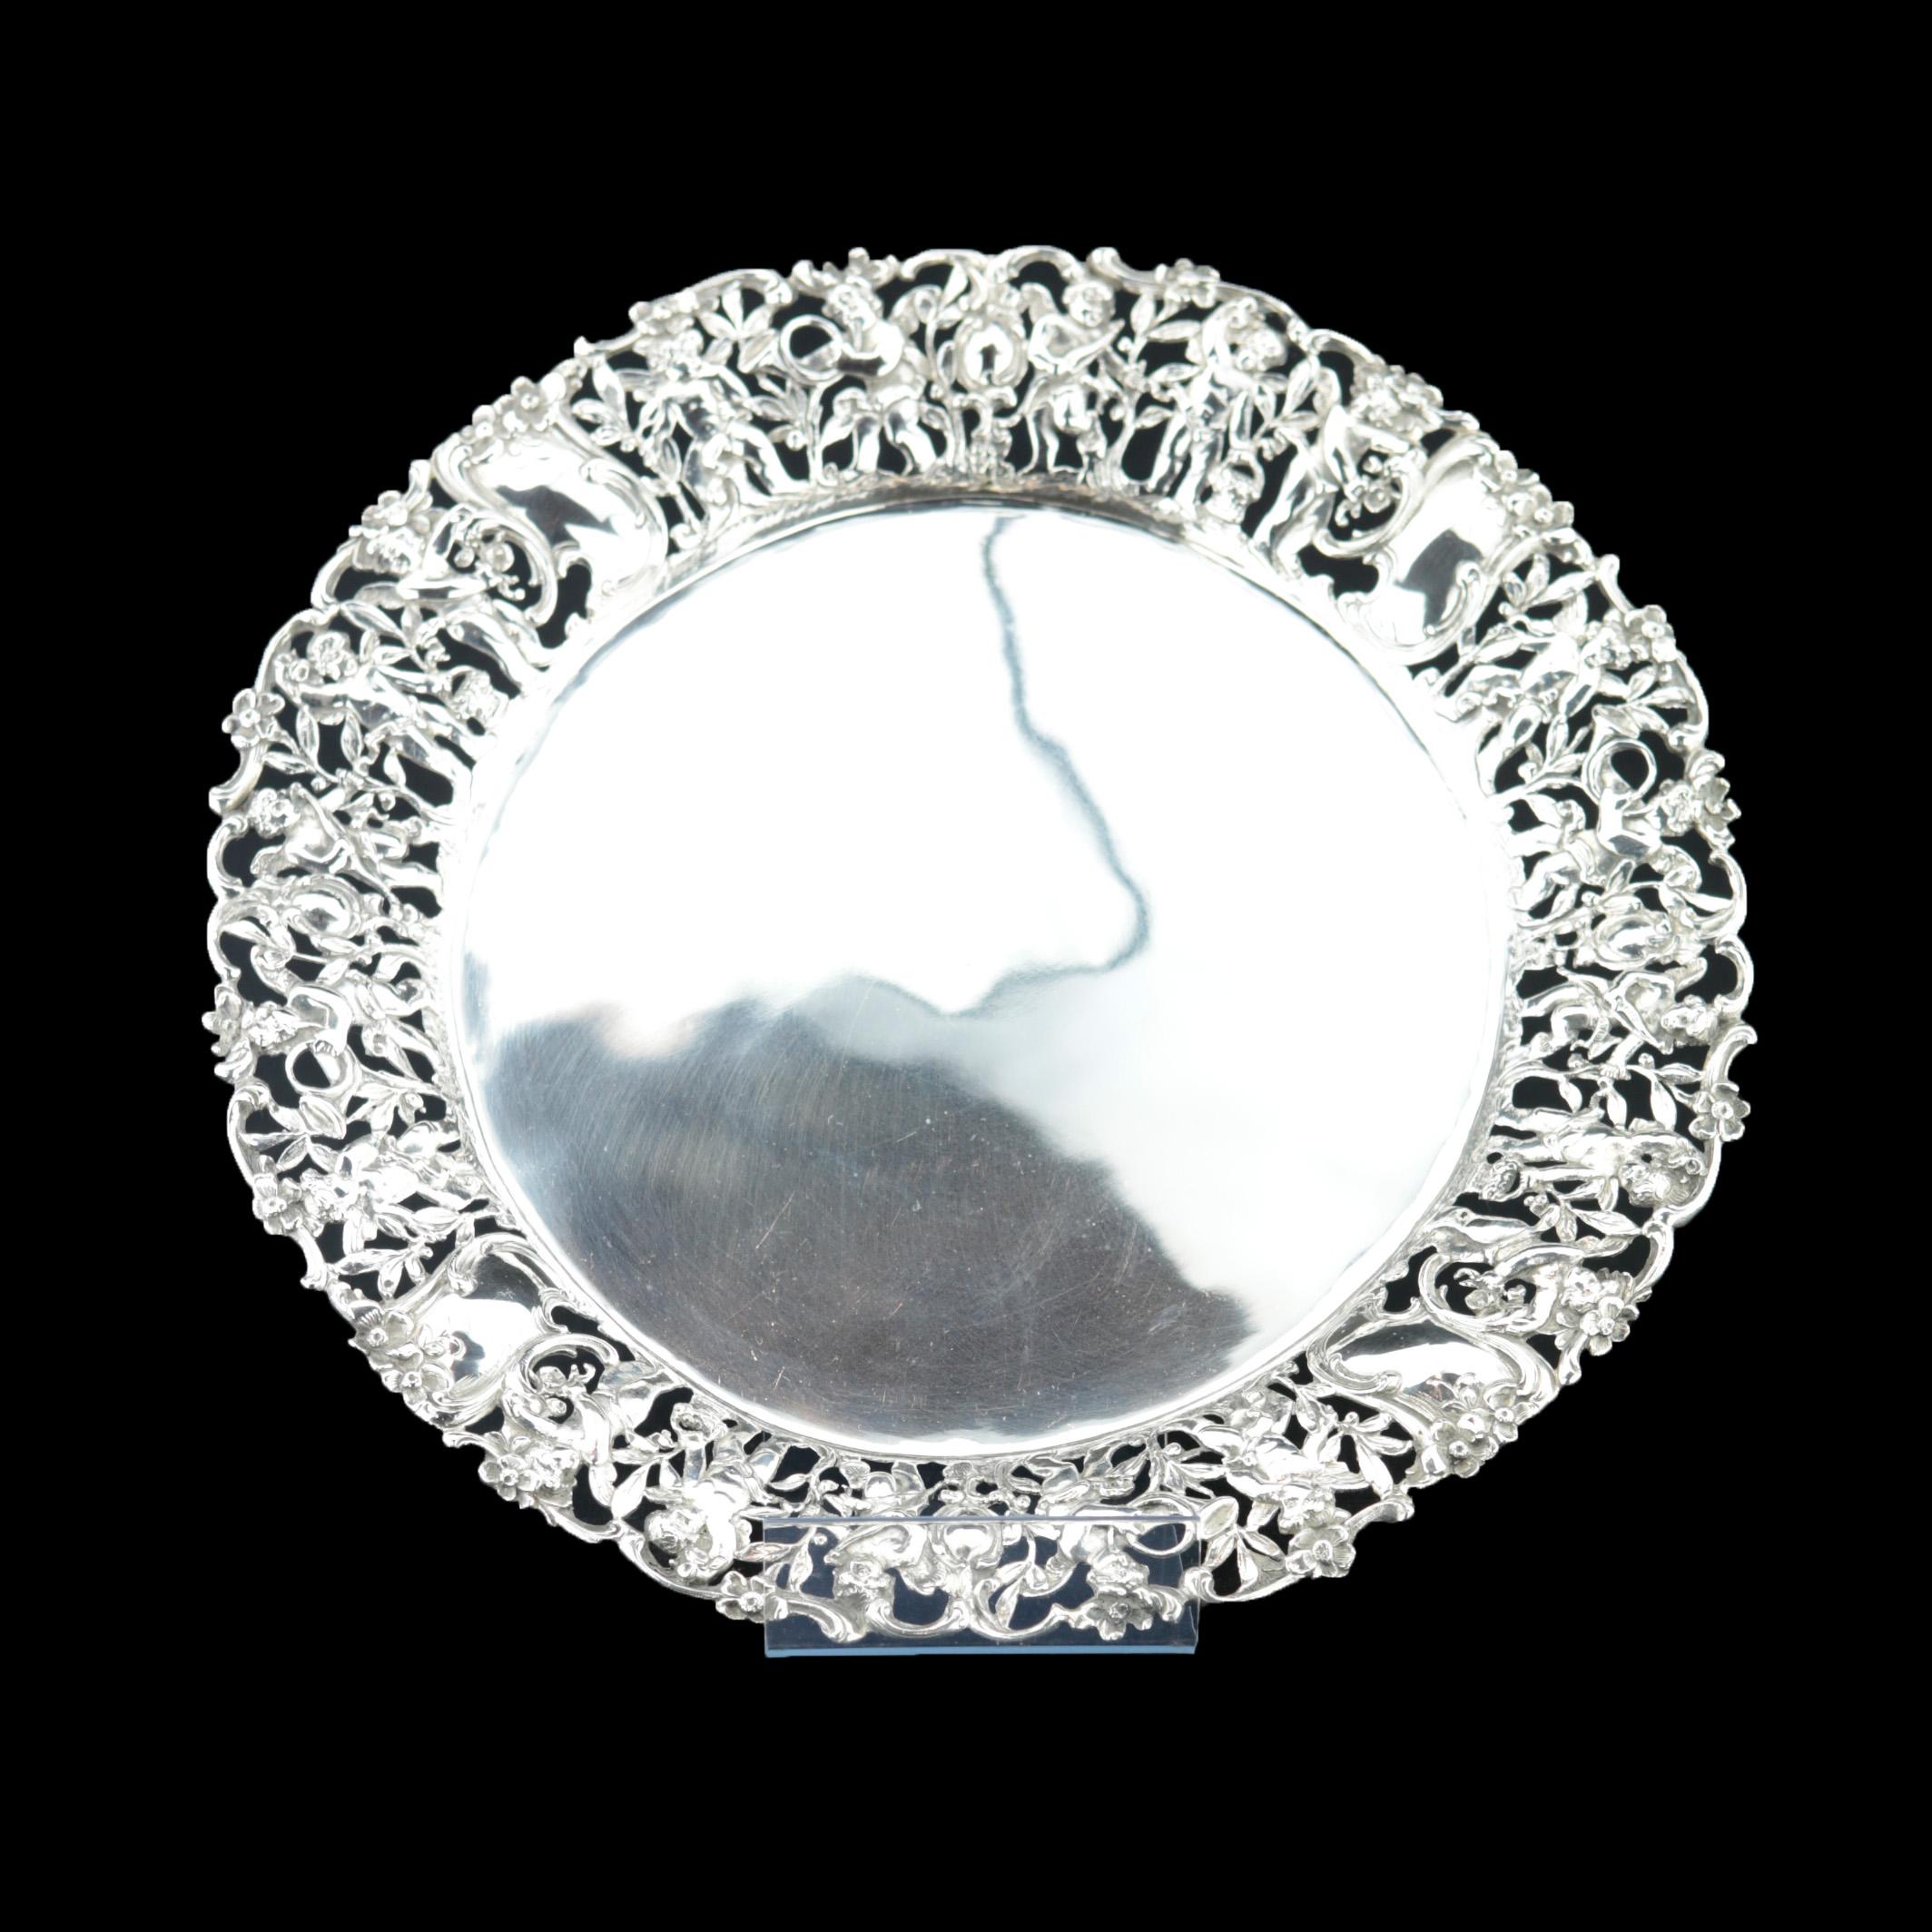 Silver tray with pierced rim, decorated with putti, German 800/- silver, hallmarked crescent and crown

Diameter 30 cm

A charming and high-quality tray / serving plate / decorative piece that can be used for many occasions. From the era of late